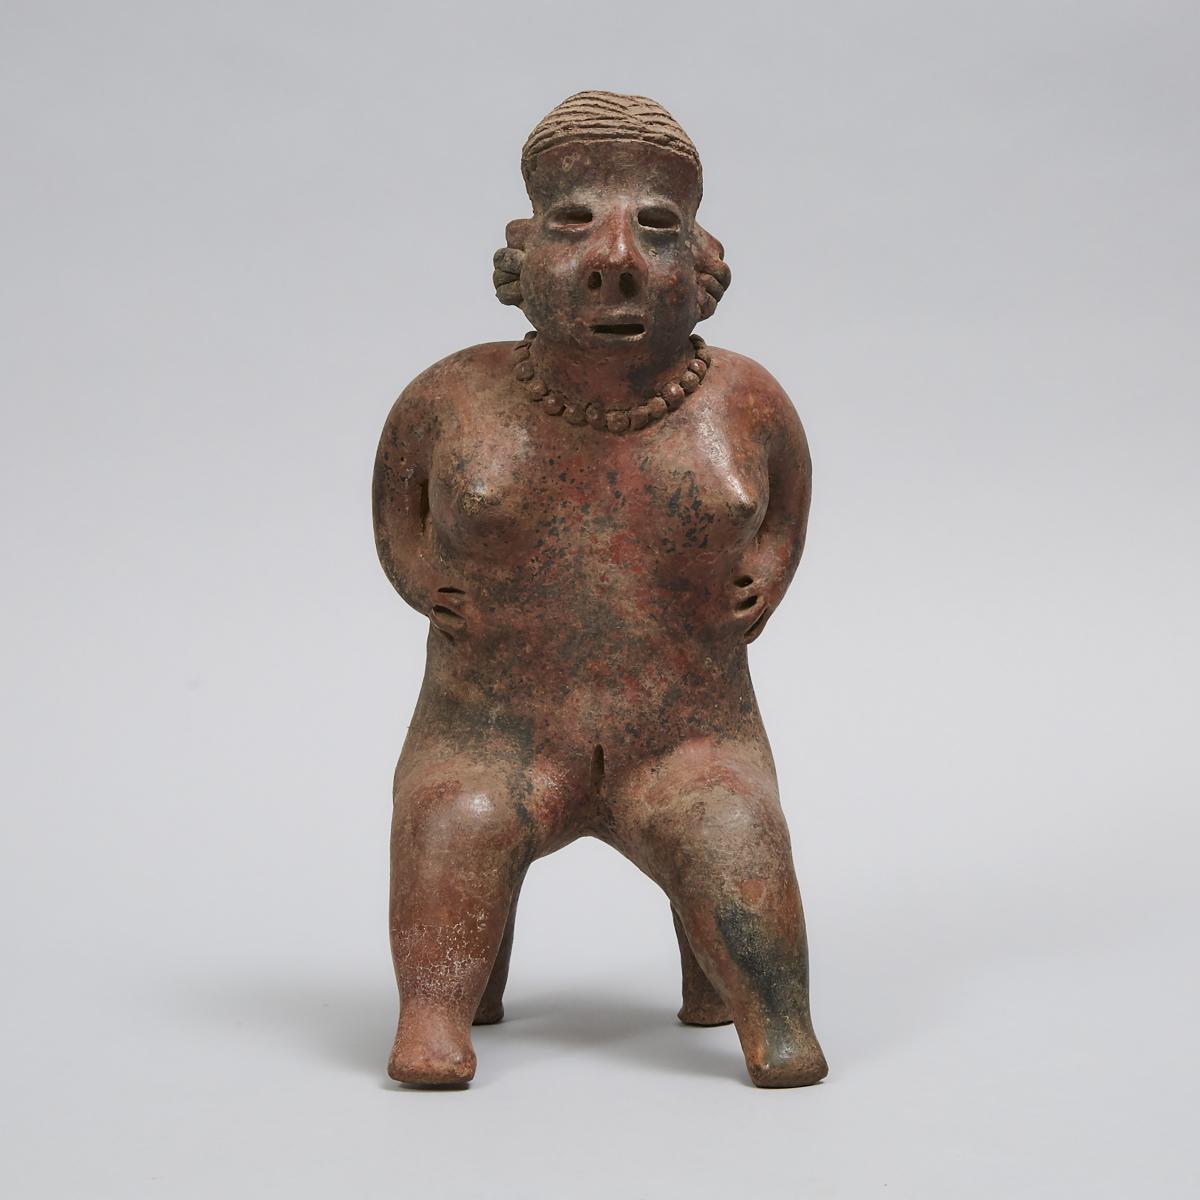 Nayarit Ixtlán del Río style Redware Pottery Figure, West Mexico, 100 B.C. - 200 A.D., height 13.2 i